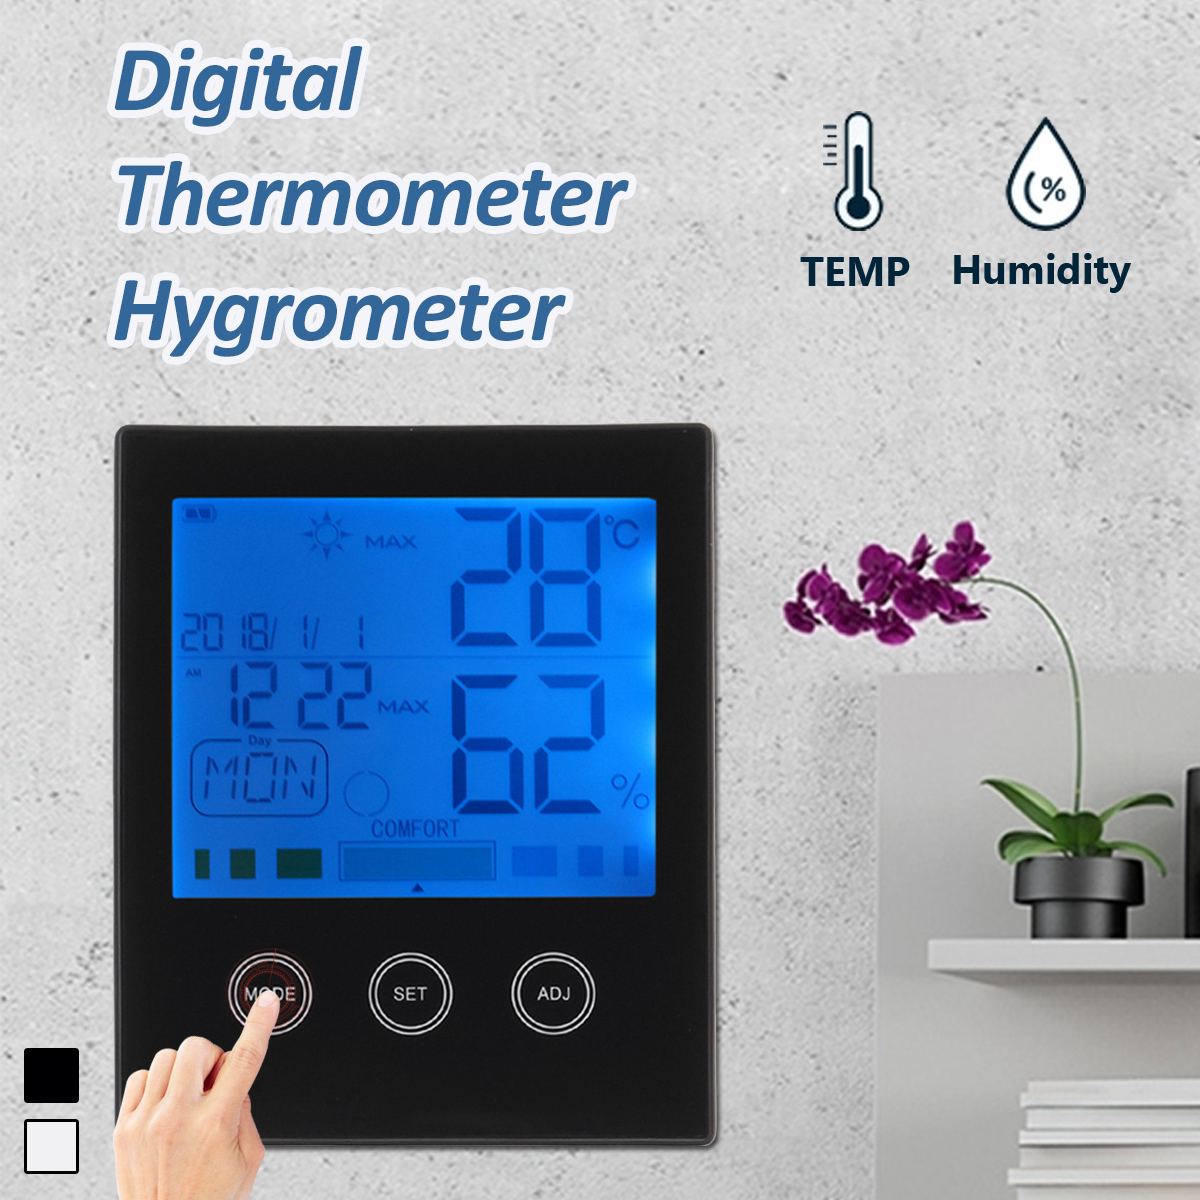 CH-909-Large-LCD-Digital-Thermometer-Hygrometer-Temperature-Humidity-Gauge-Alarm-Clock-Thermometer-1335367-1